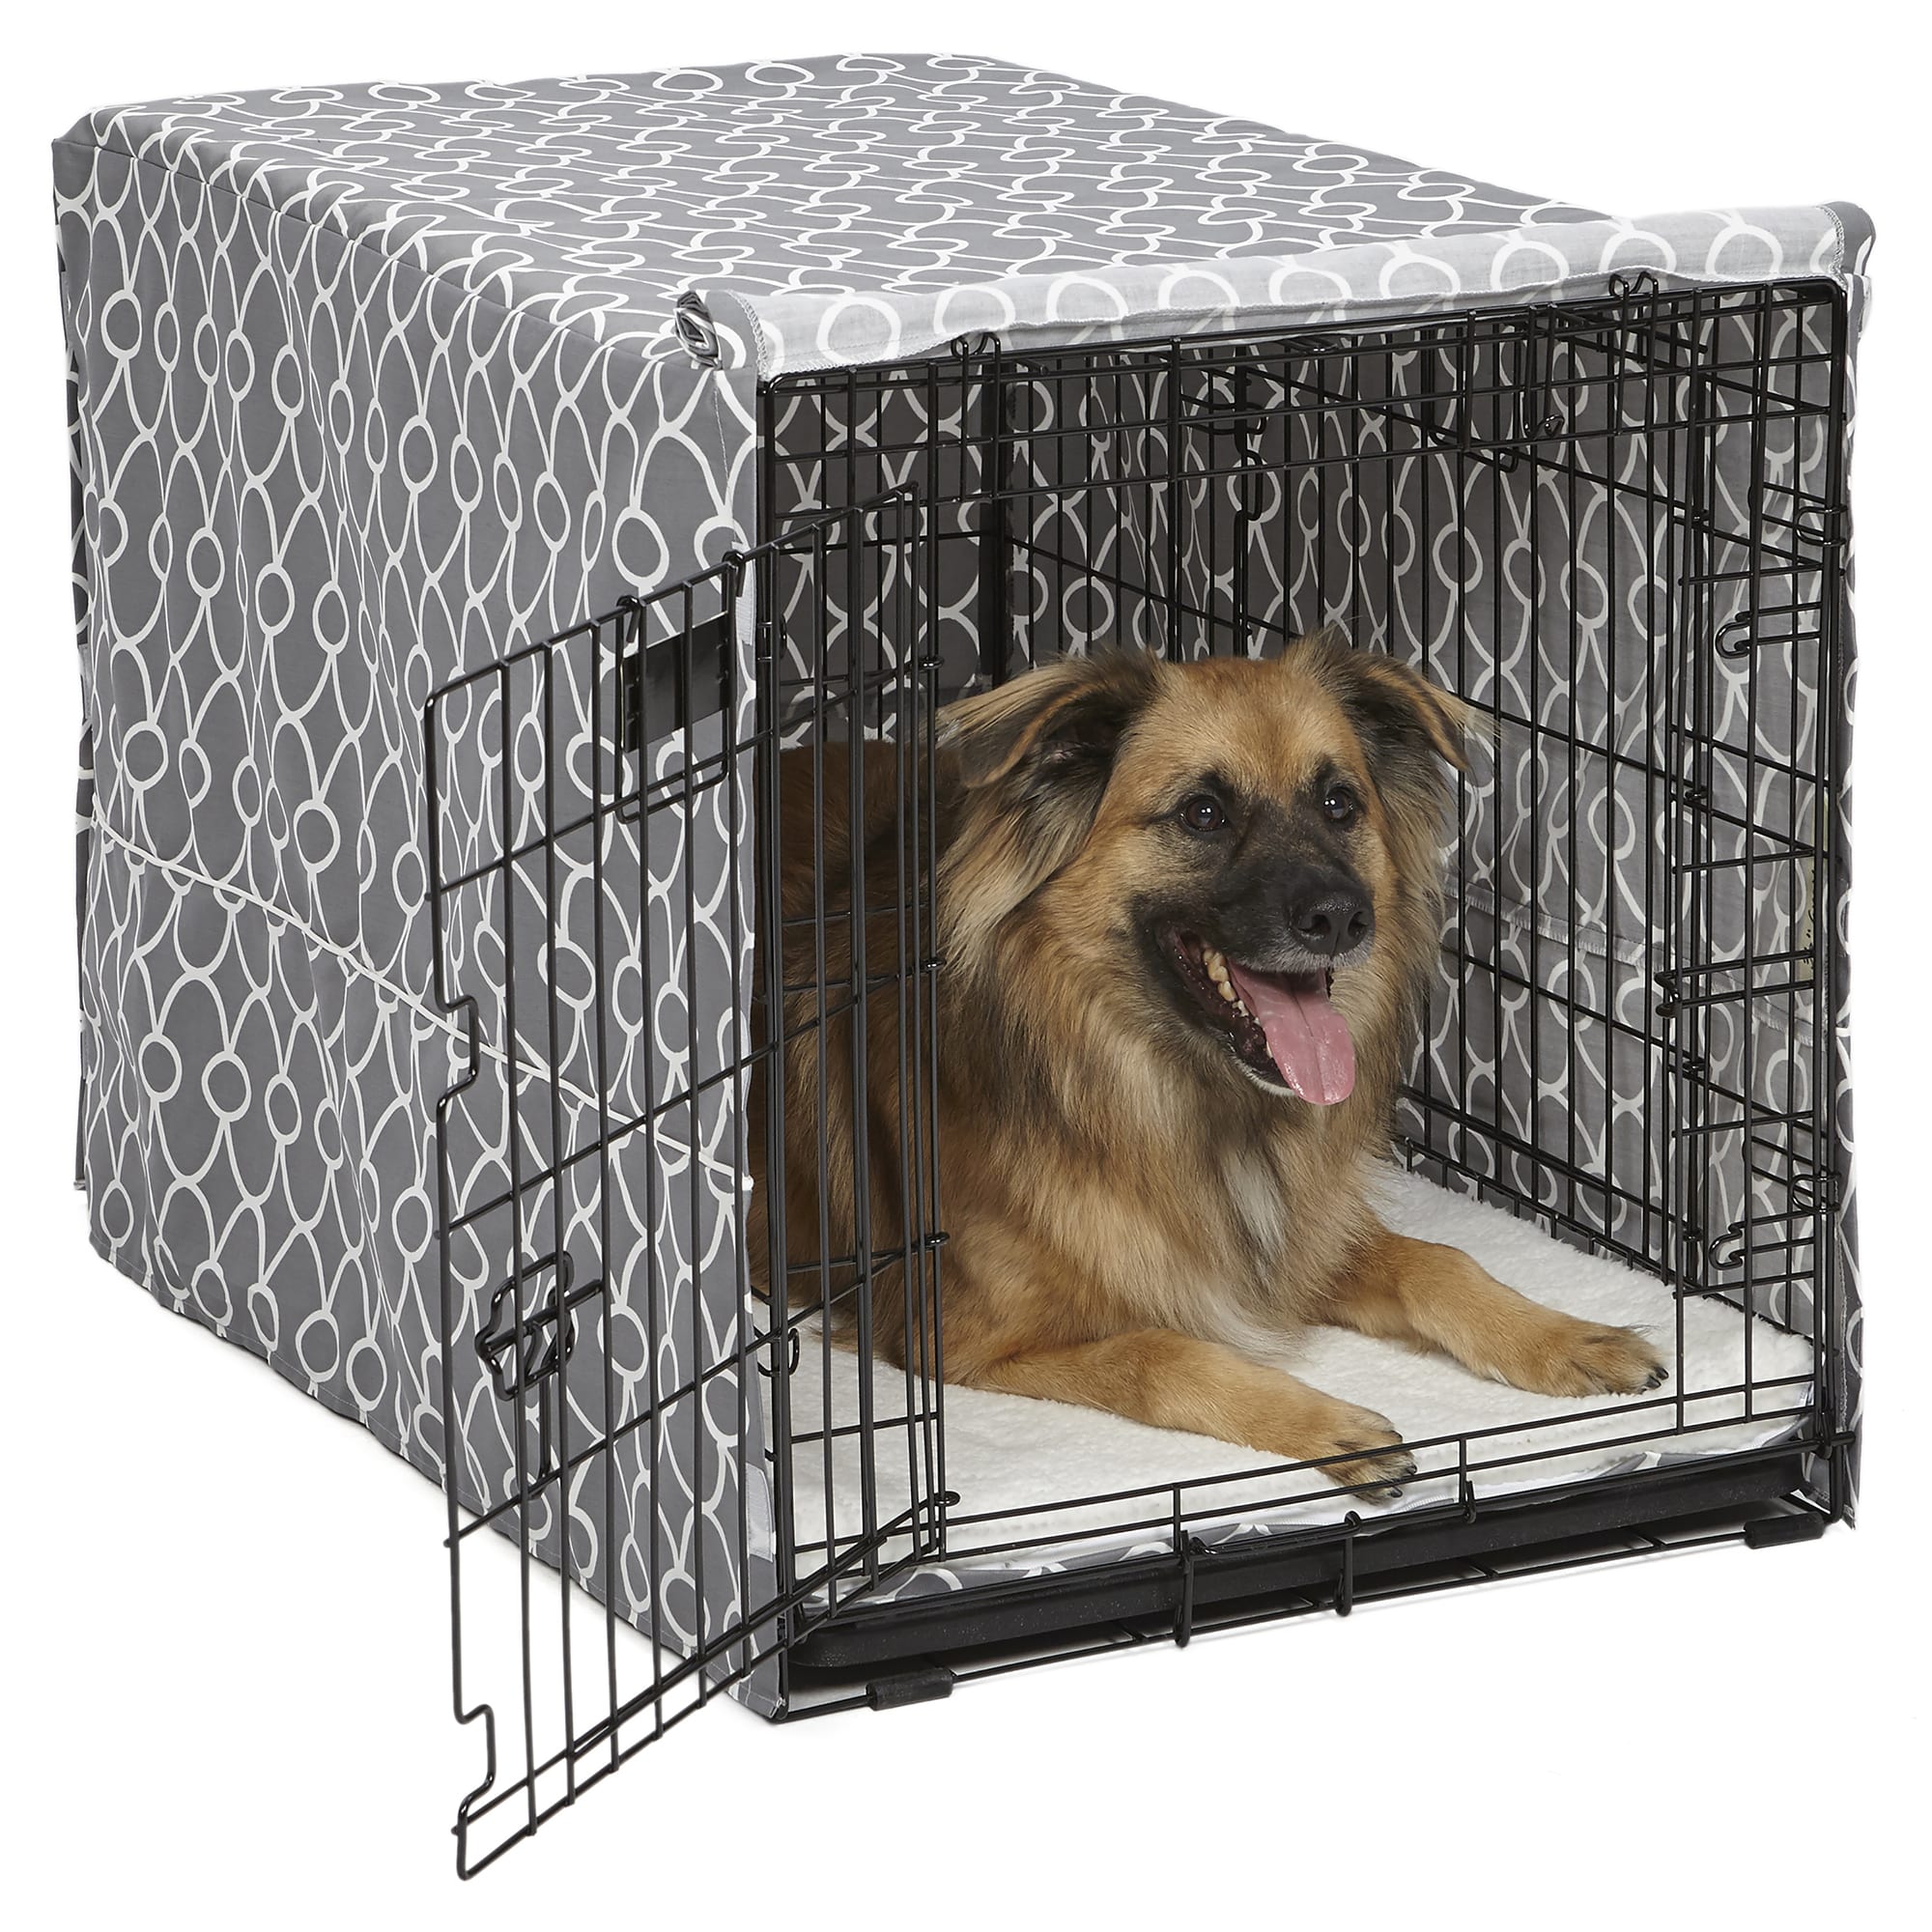 Midwest Quiet Time Defender Gray Crate Cover for Dogs, 36" L Petco